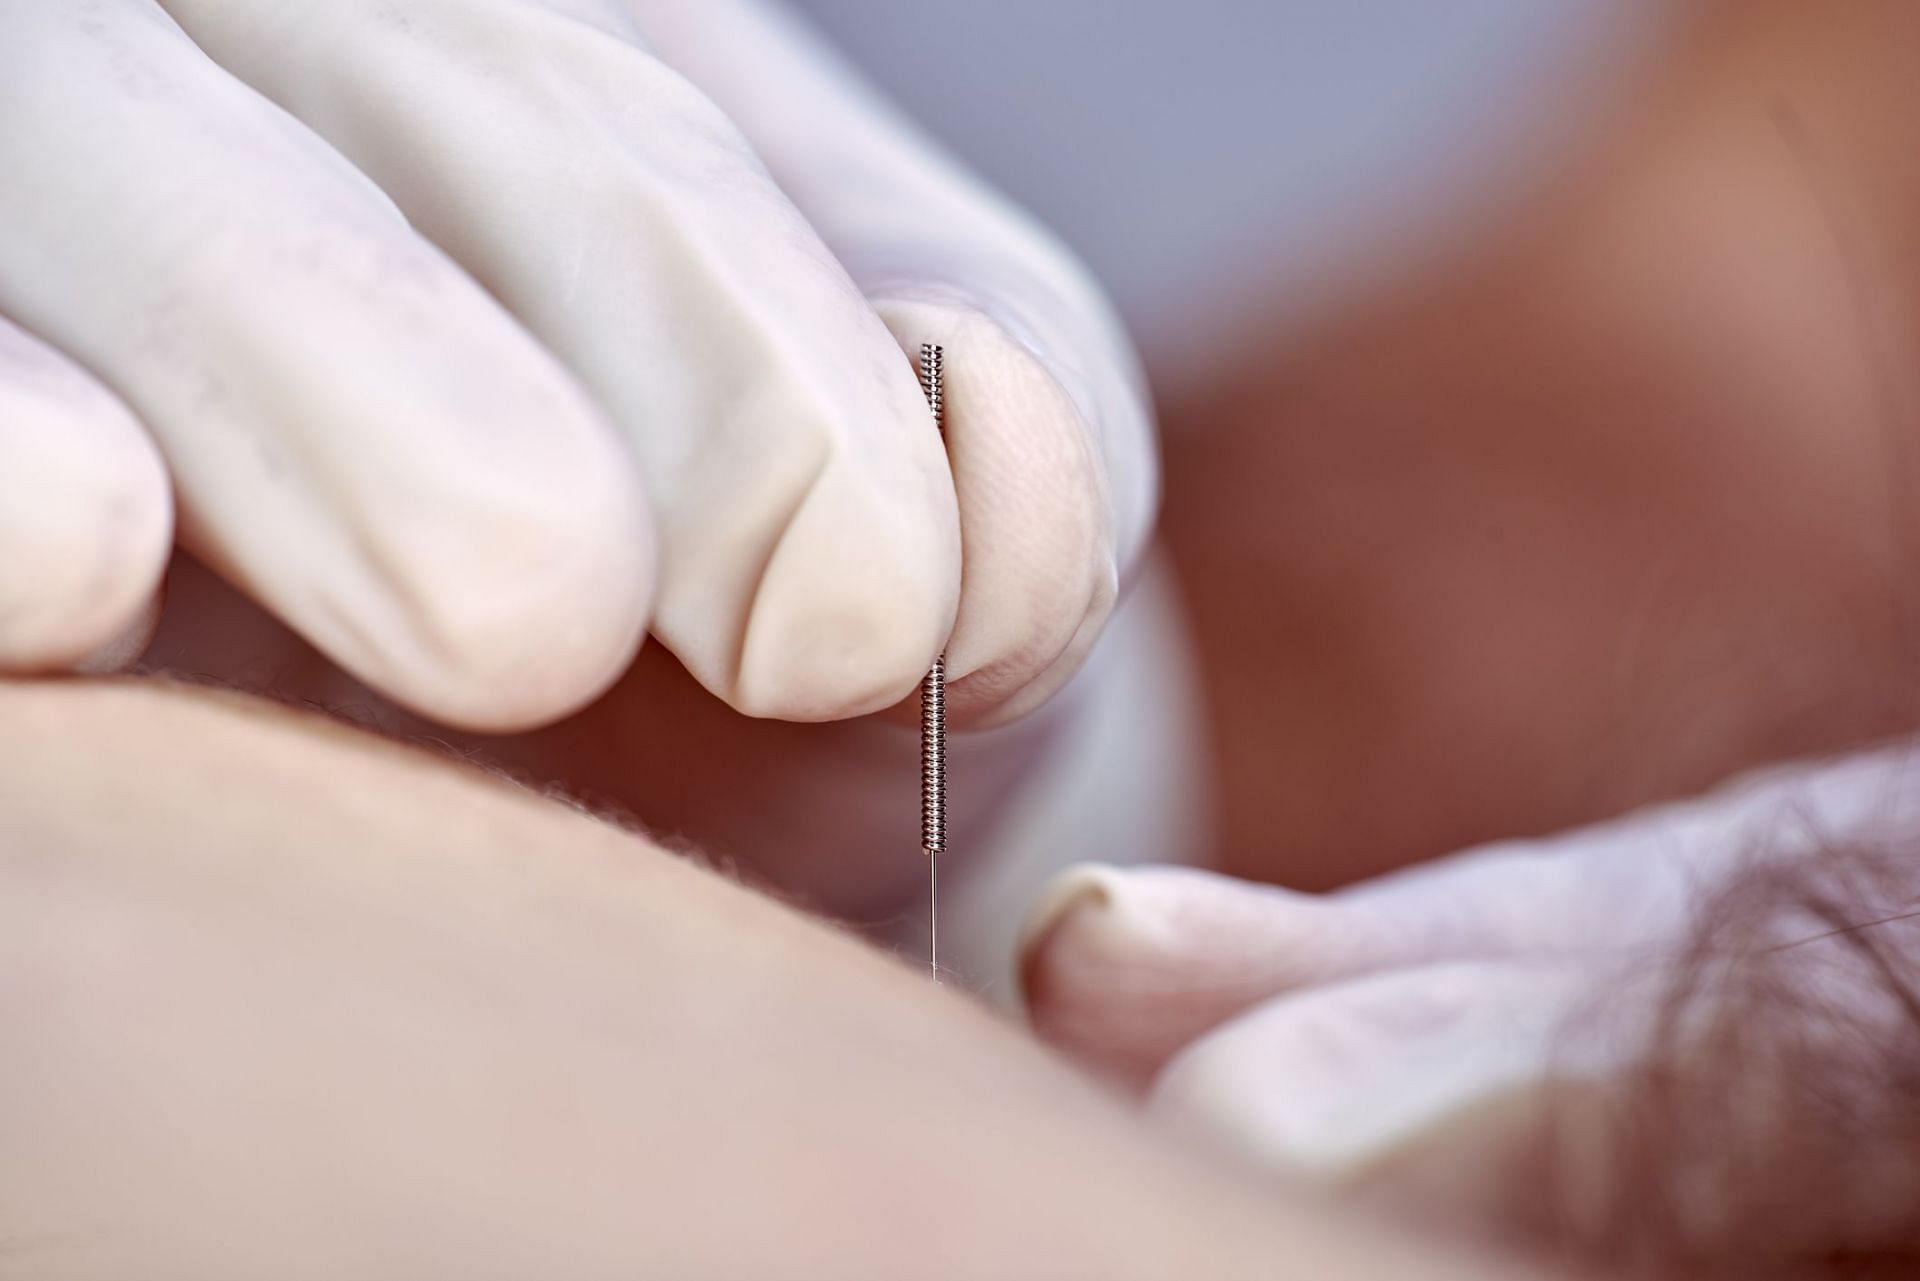 Dry needling vs. acupuncture (Image via Getty Images/ Sunlight19)